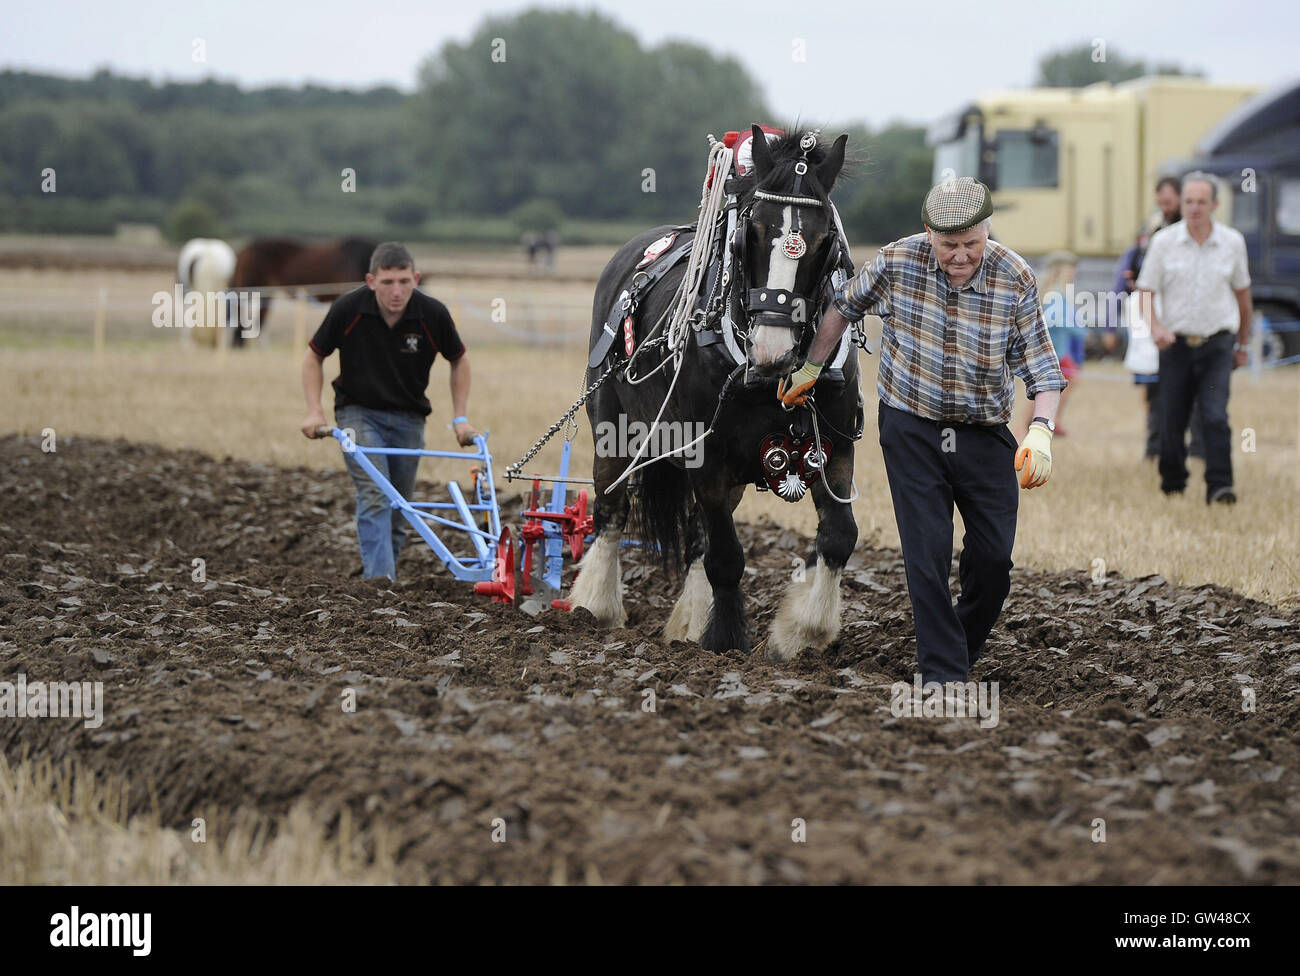 Bertie Faulkner and Declan Feris with their plough horse Sam at the World Ploughing Contest at Crockey Hill near York, where representatives from over thirty countries competed in various categories that included vintage and horse drawn alongside conventional tractors. Stock Photo